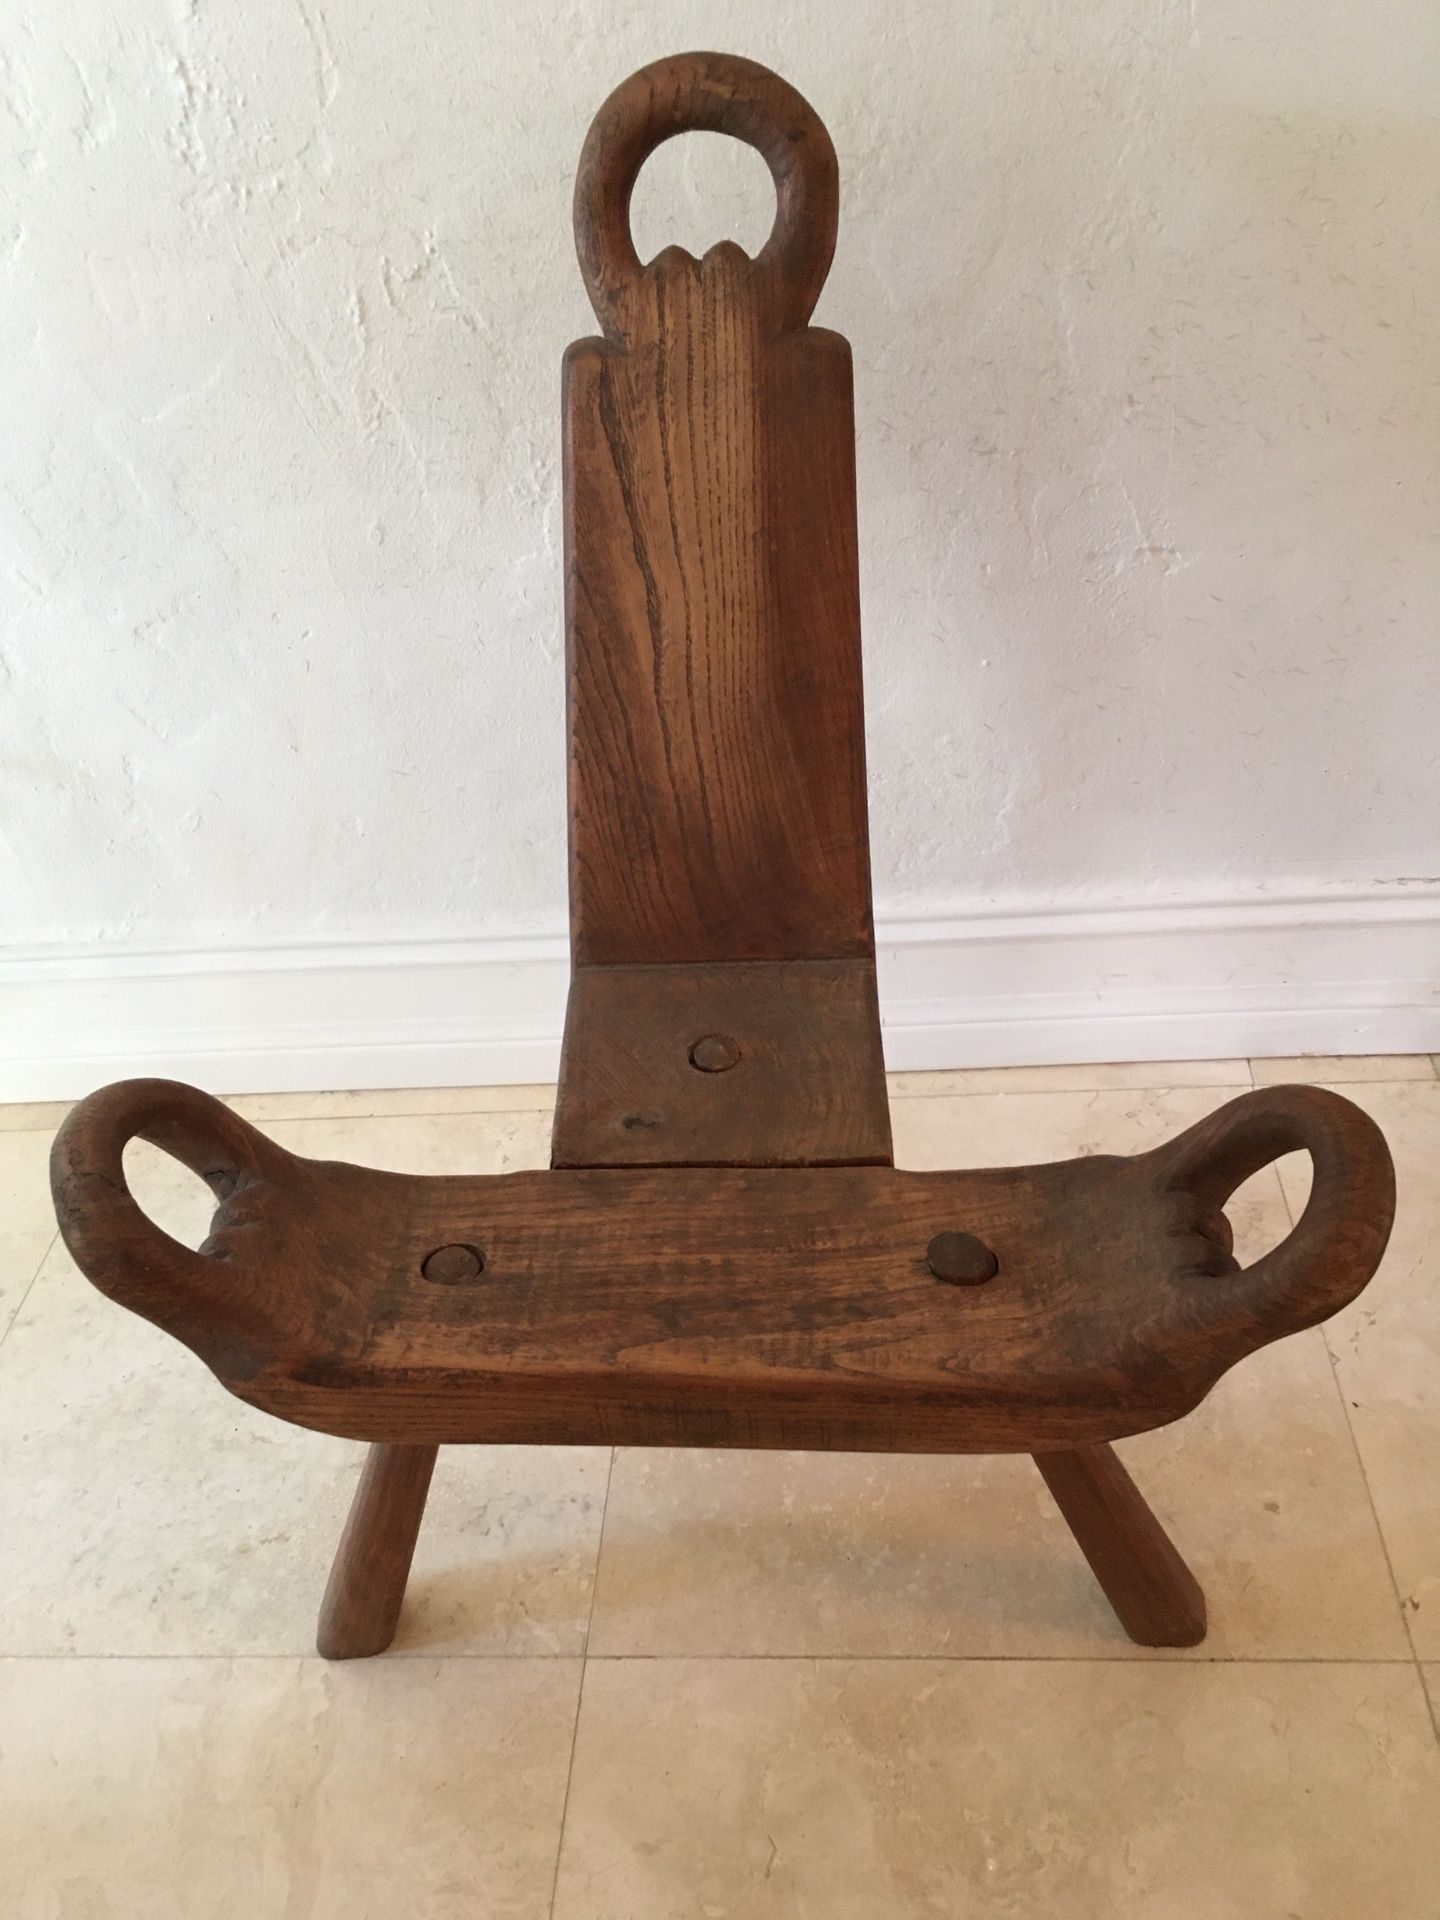 FINAL SALE! Primitive Birthing Chair